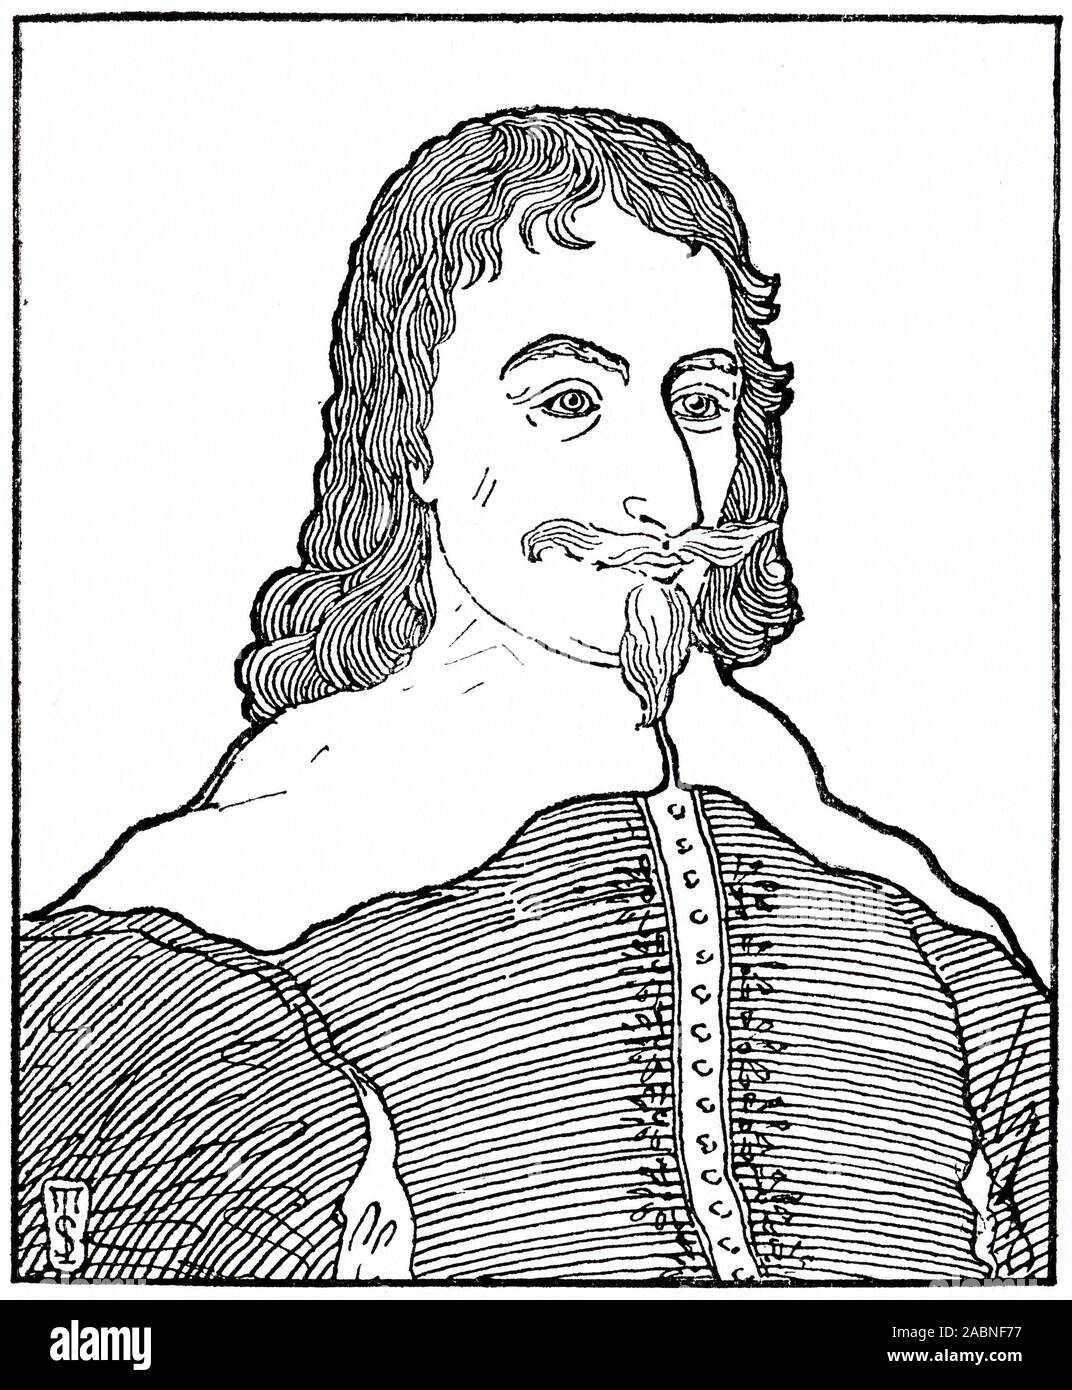 Engraved portrait of Archibald Campbell, 1st Marquess of Argyll, 8th Earl of Argyll, chief of Clan Campbell, (1607 – 1661) was a Scottish nobleman, politician, and peer. Often remembered as the principal opponent of the royalist general James Graham, 1st Marquess of Montrose. Stock Photo